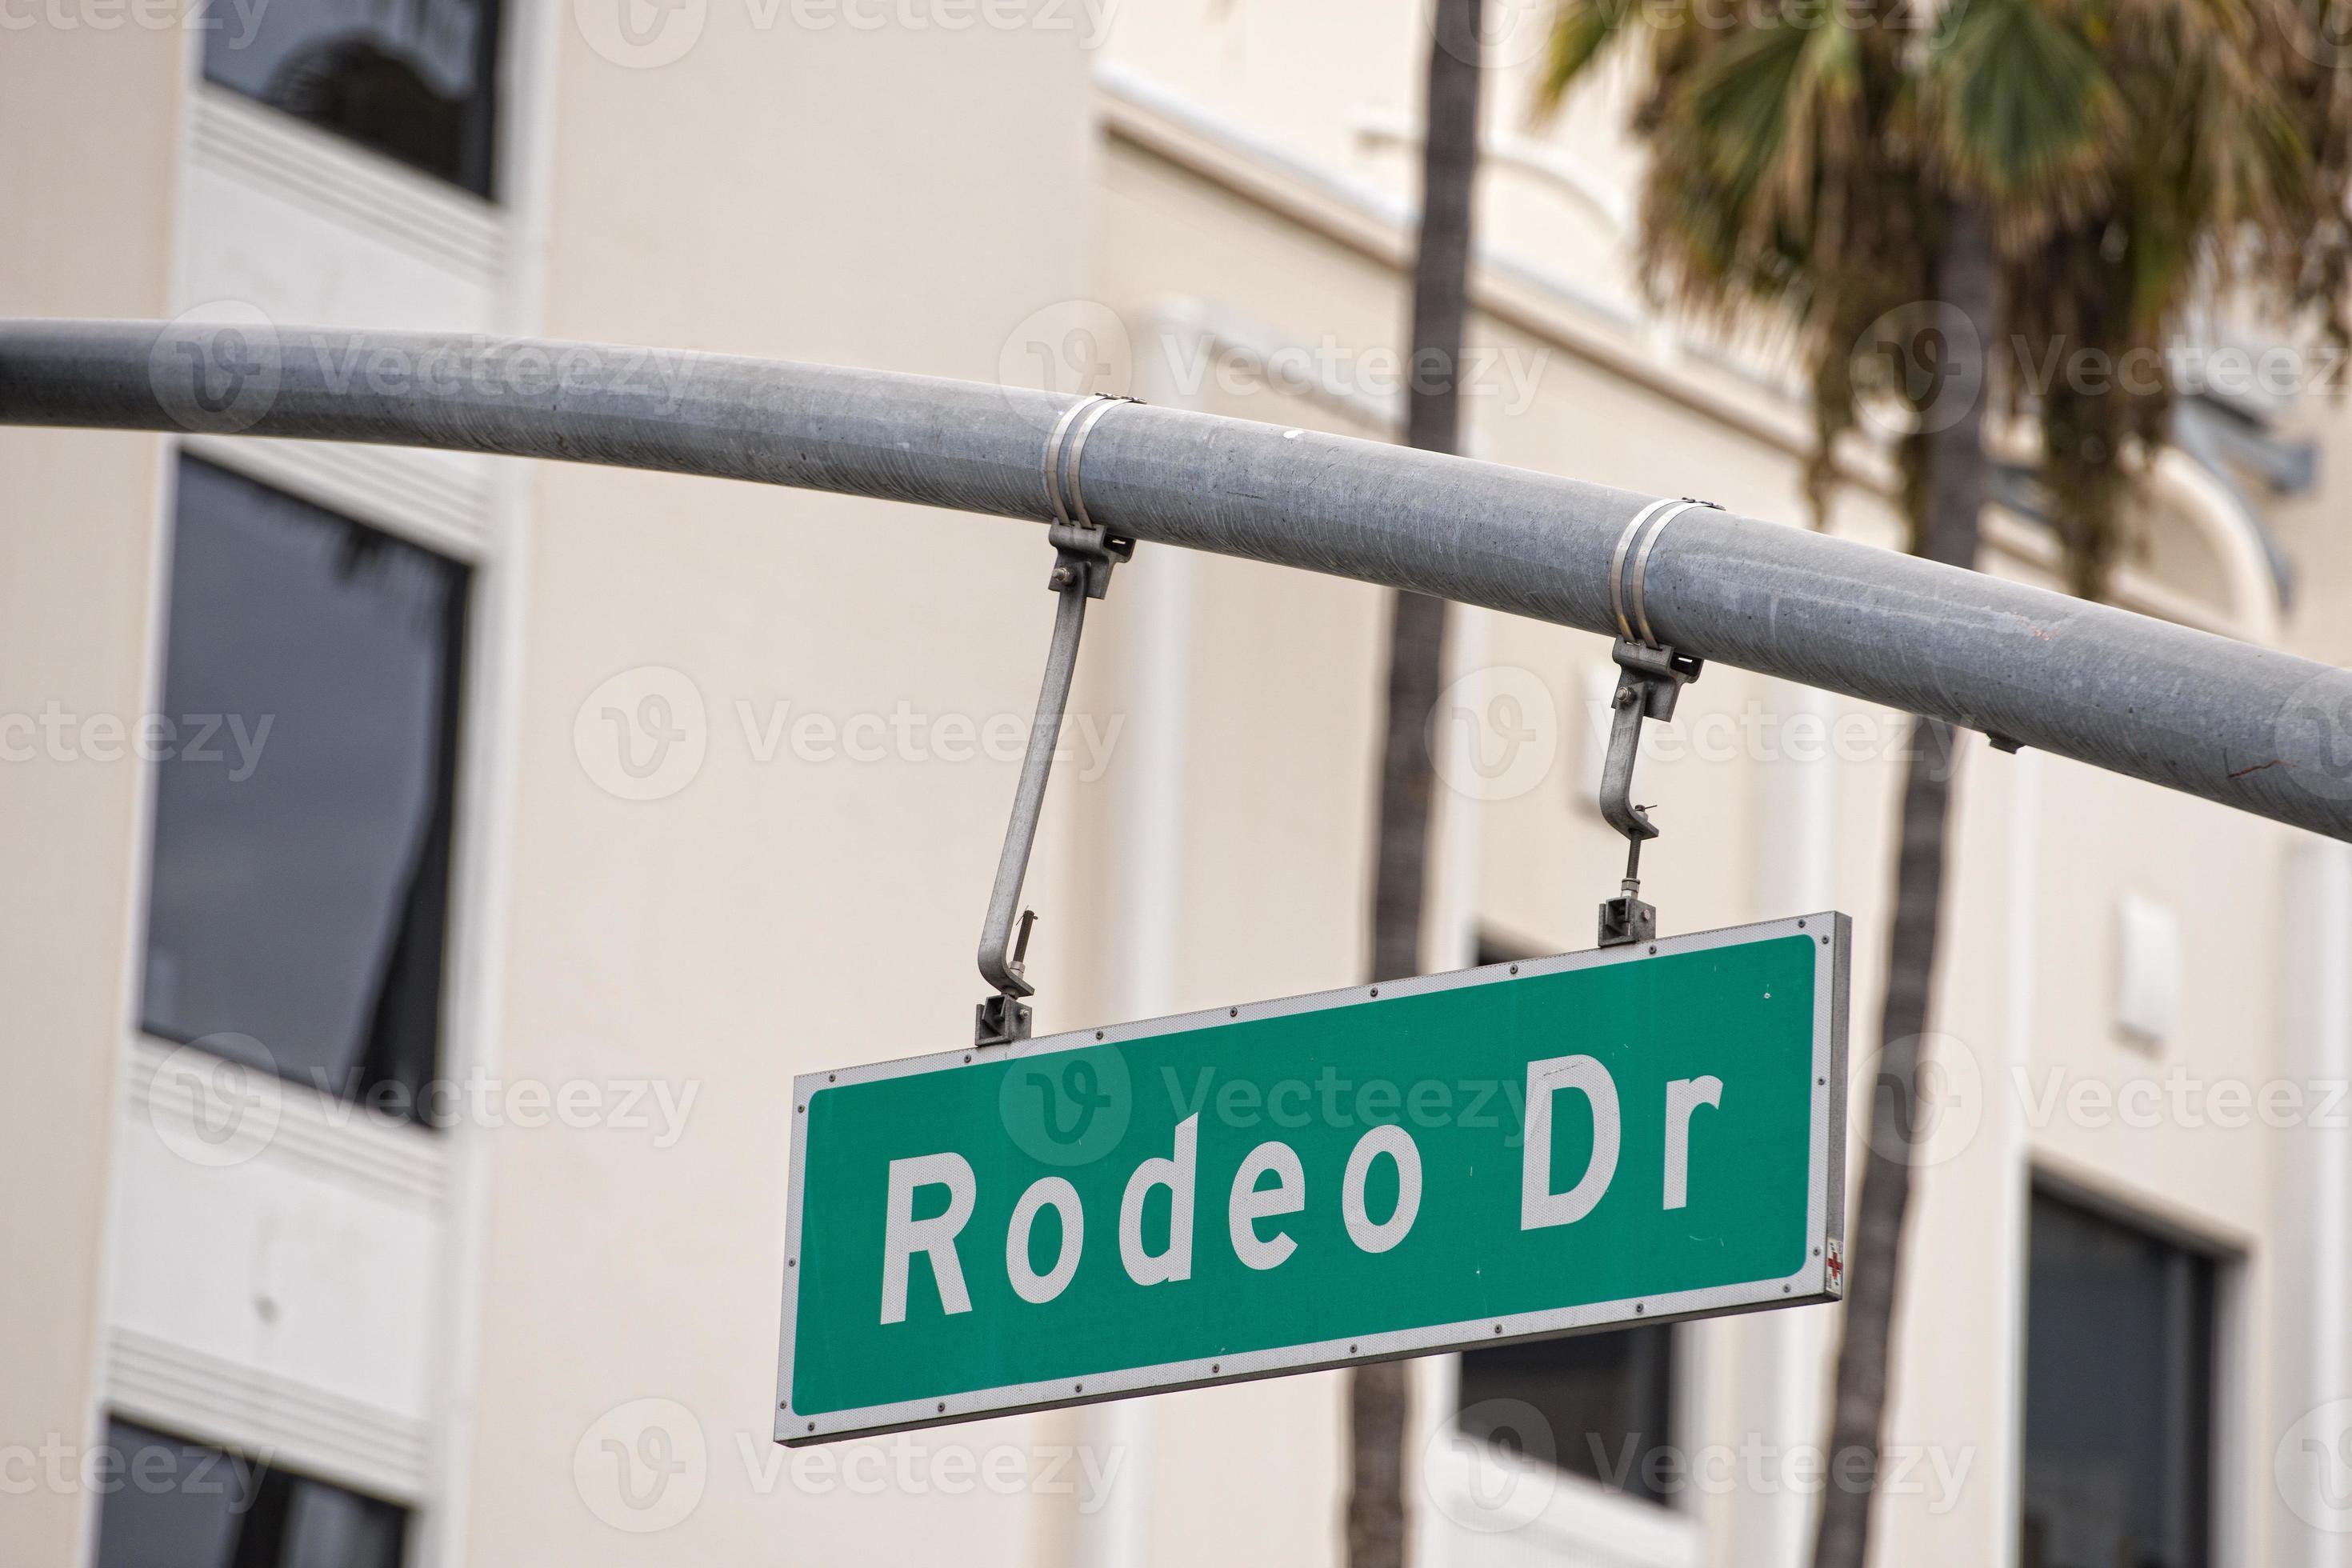 LA Hollywood Rodeo Drive sign 18754865 Stock Photo at Vecteezy